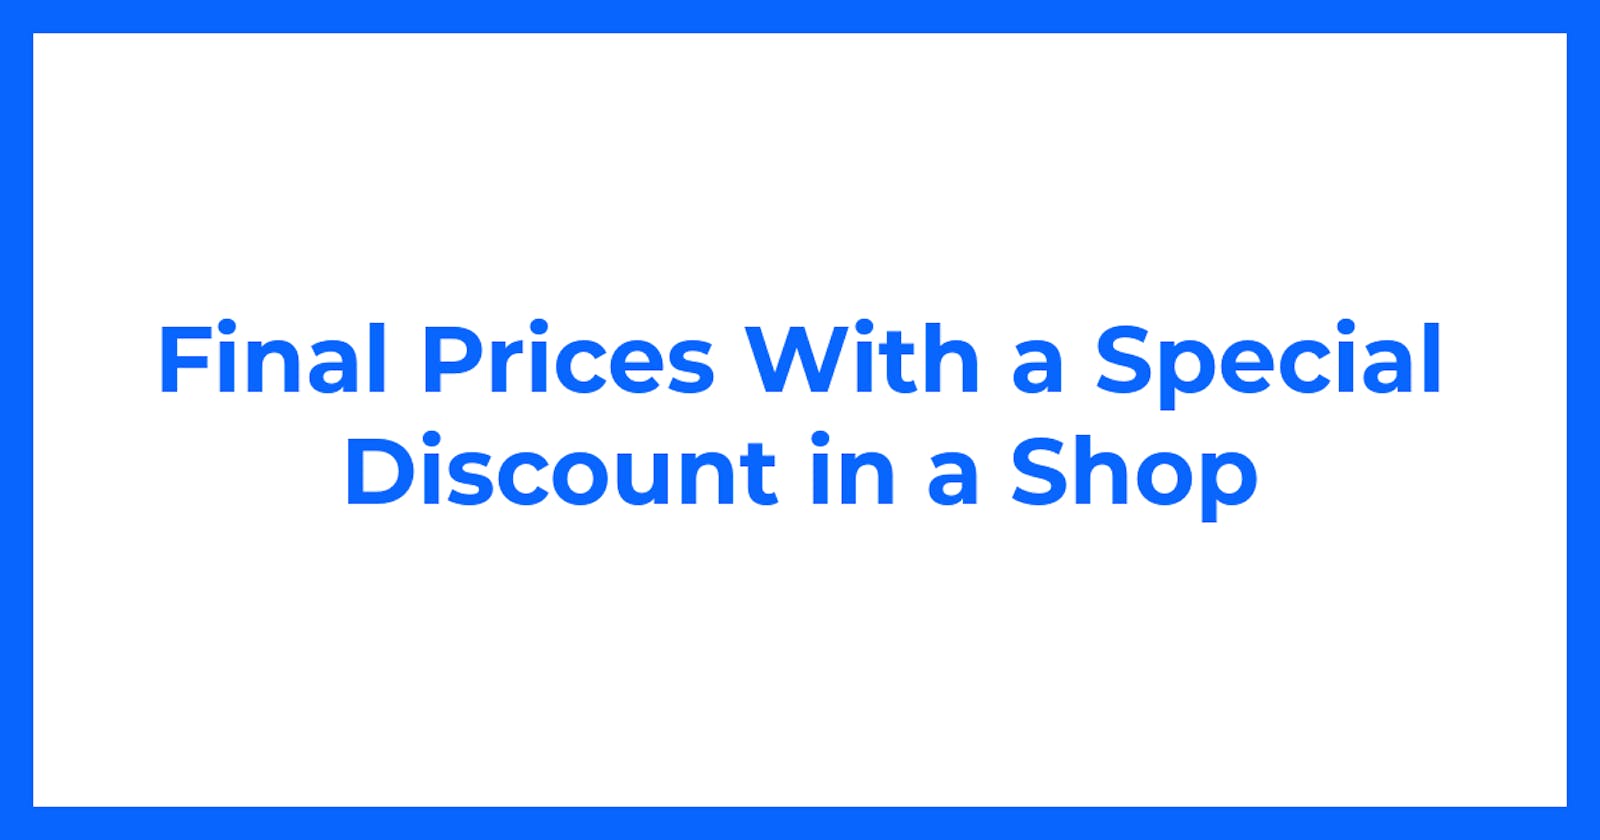 Final Prices With a Special Discount in a Shop